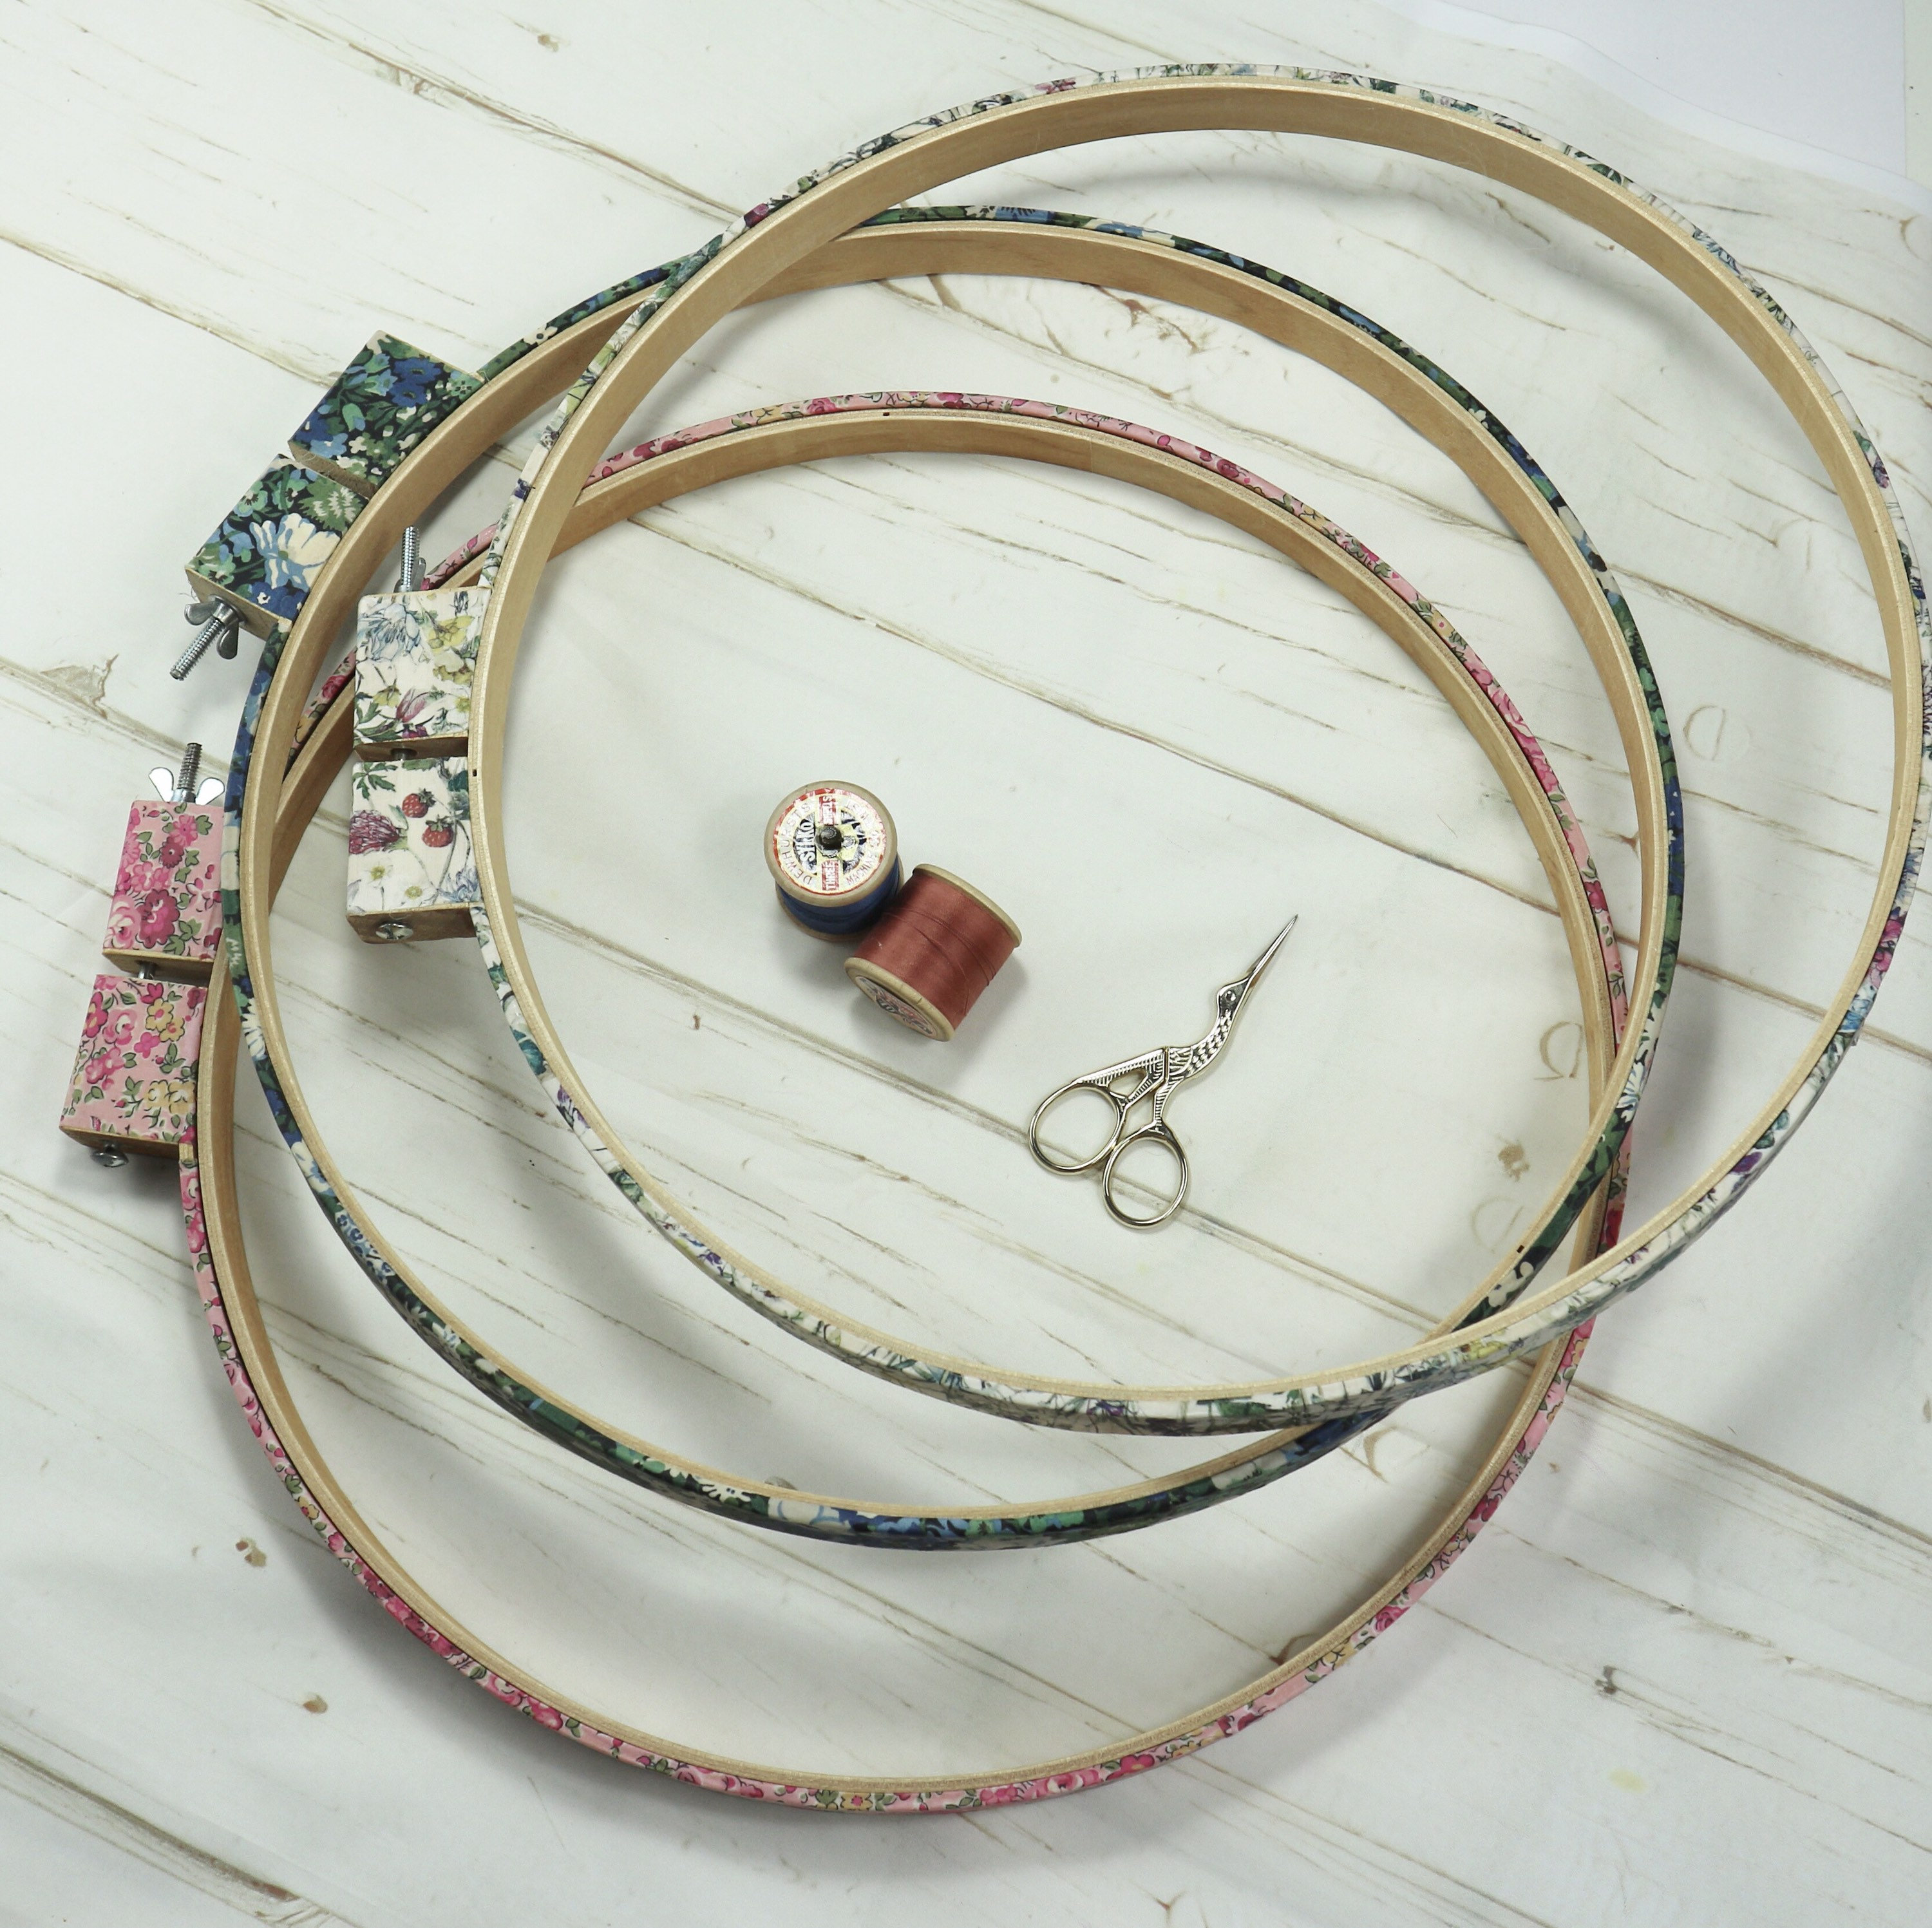 Sue's Quilting Company - Quilting Hoop 14 in $29.95 — Countryside